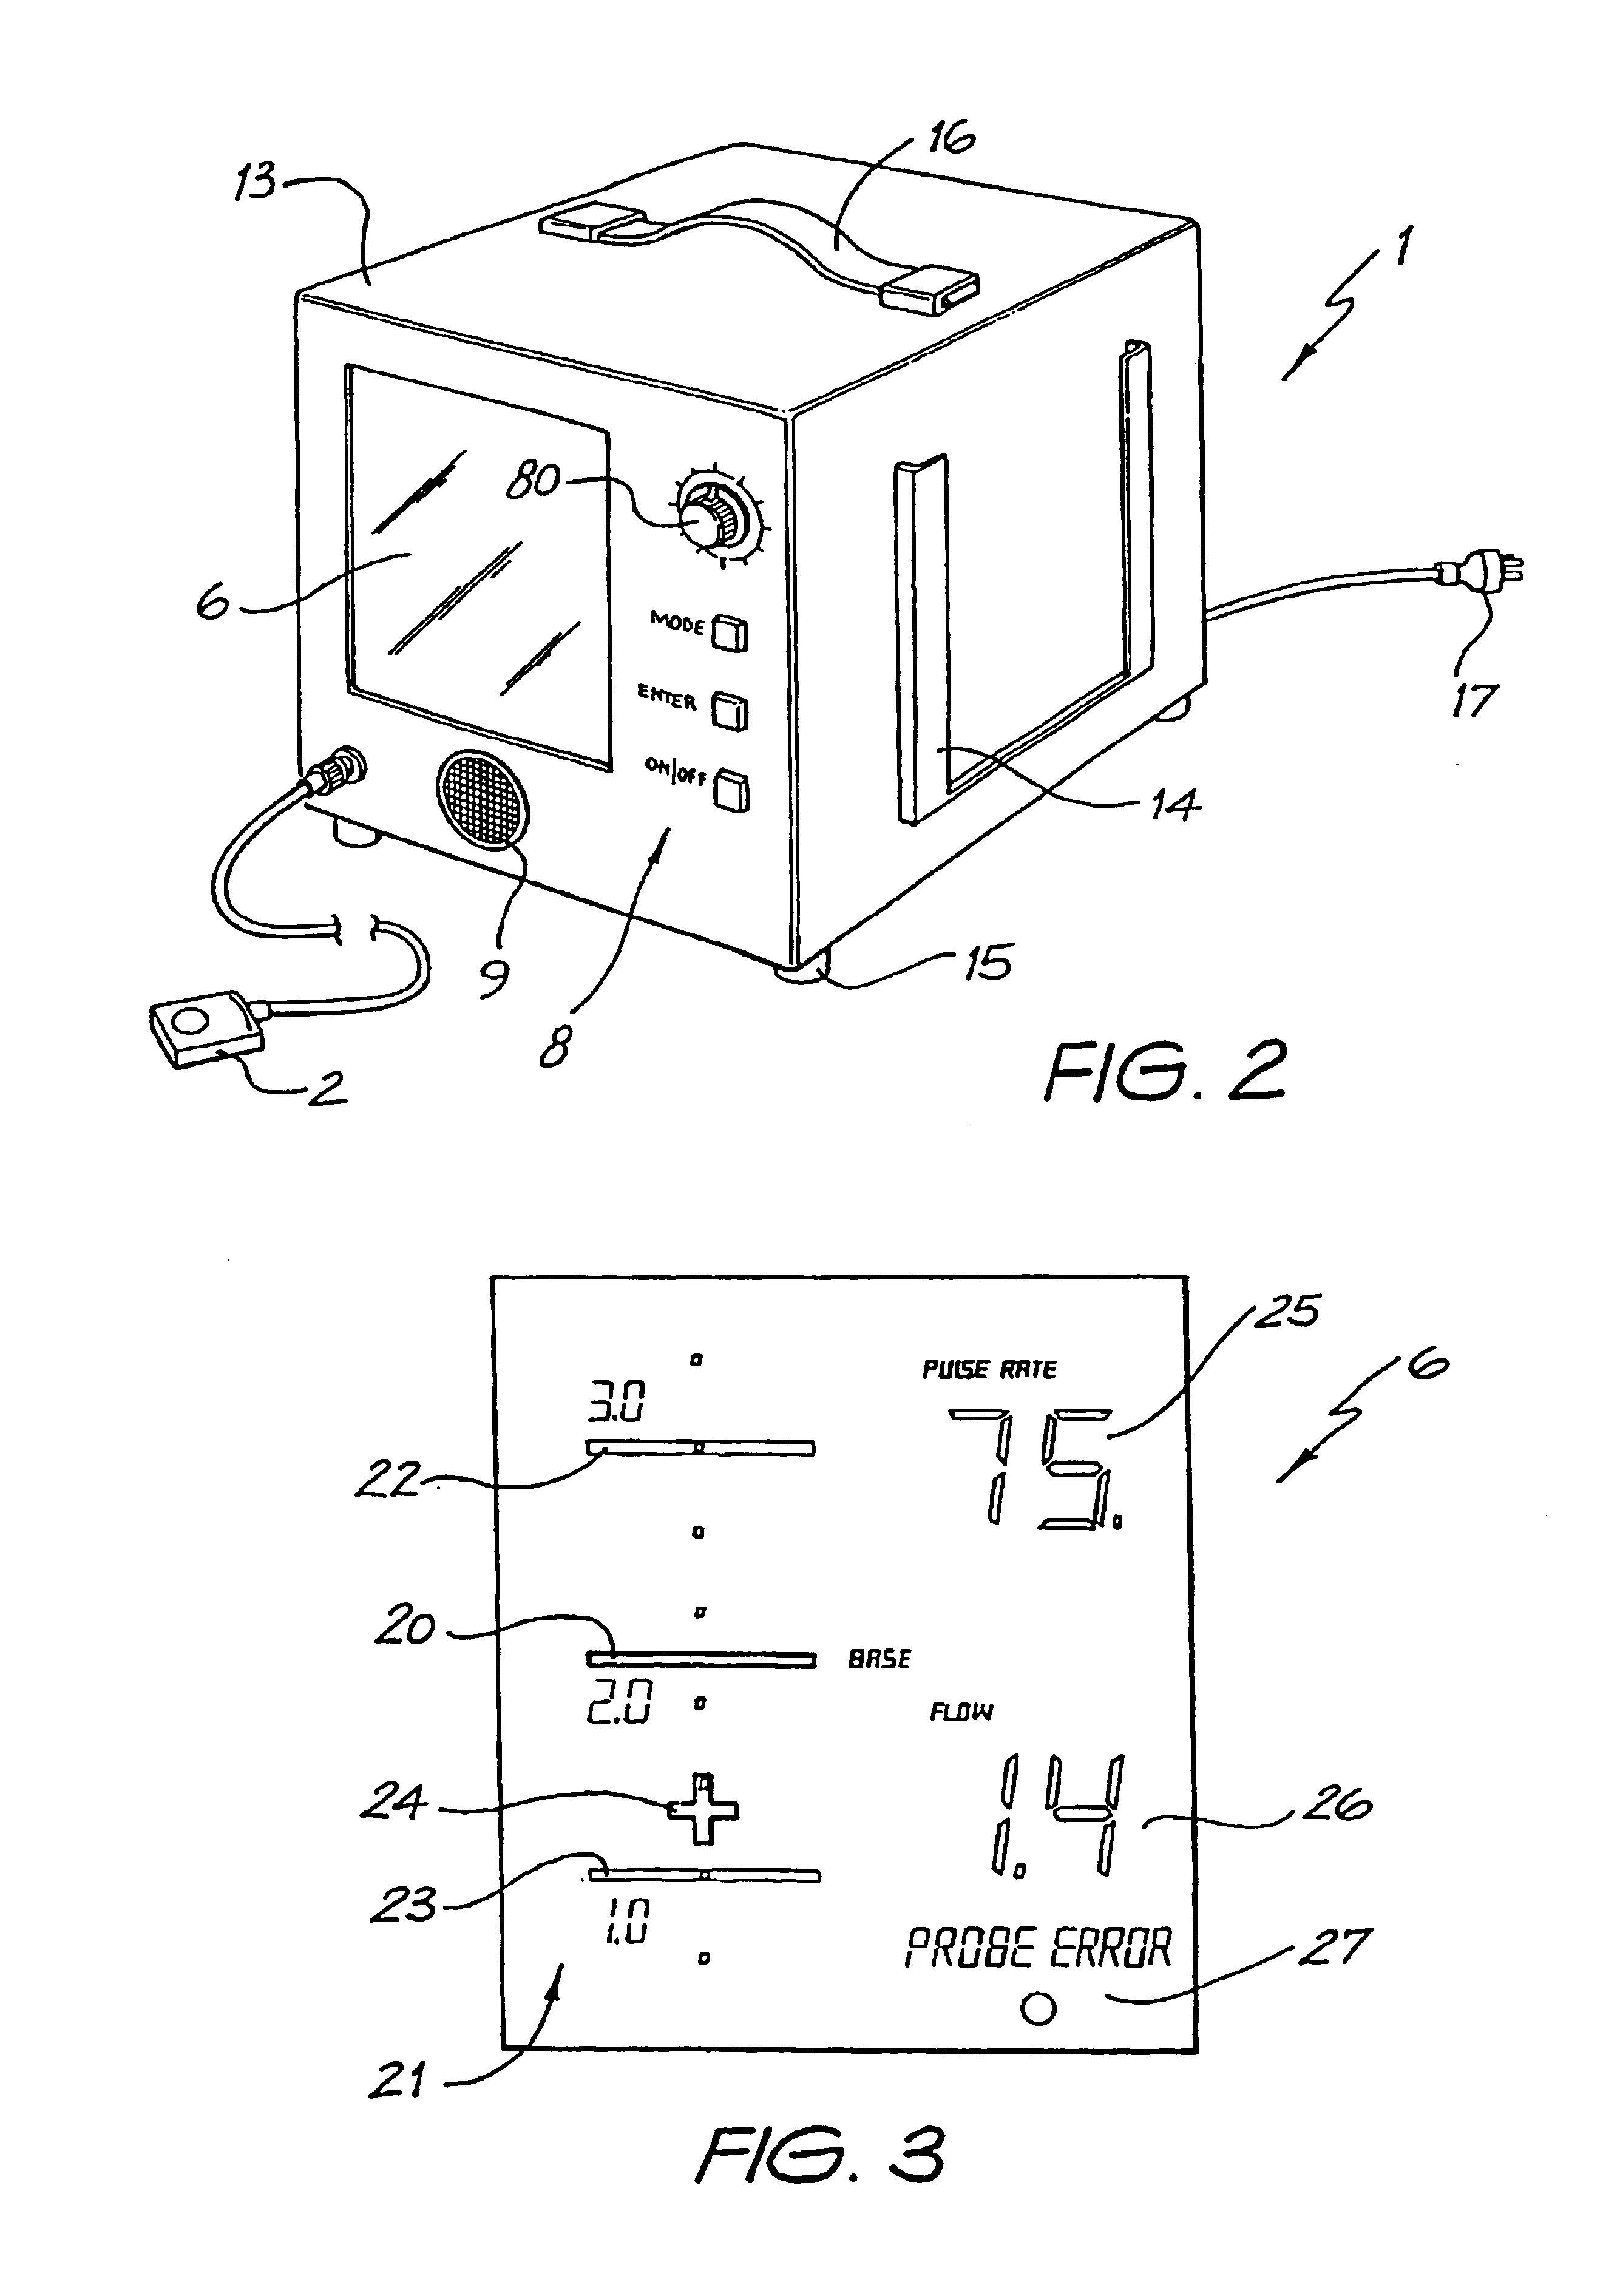 Method and apparatus for monitoring haemodynamic function